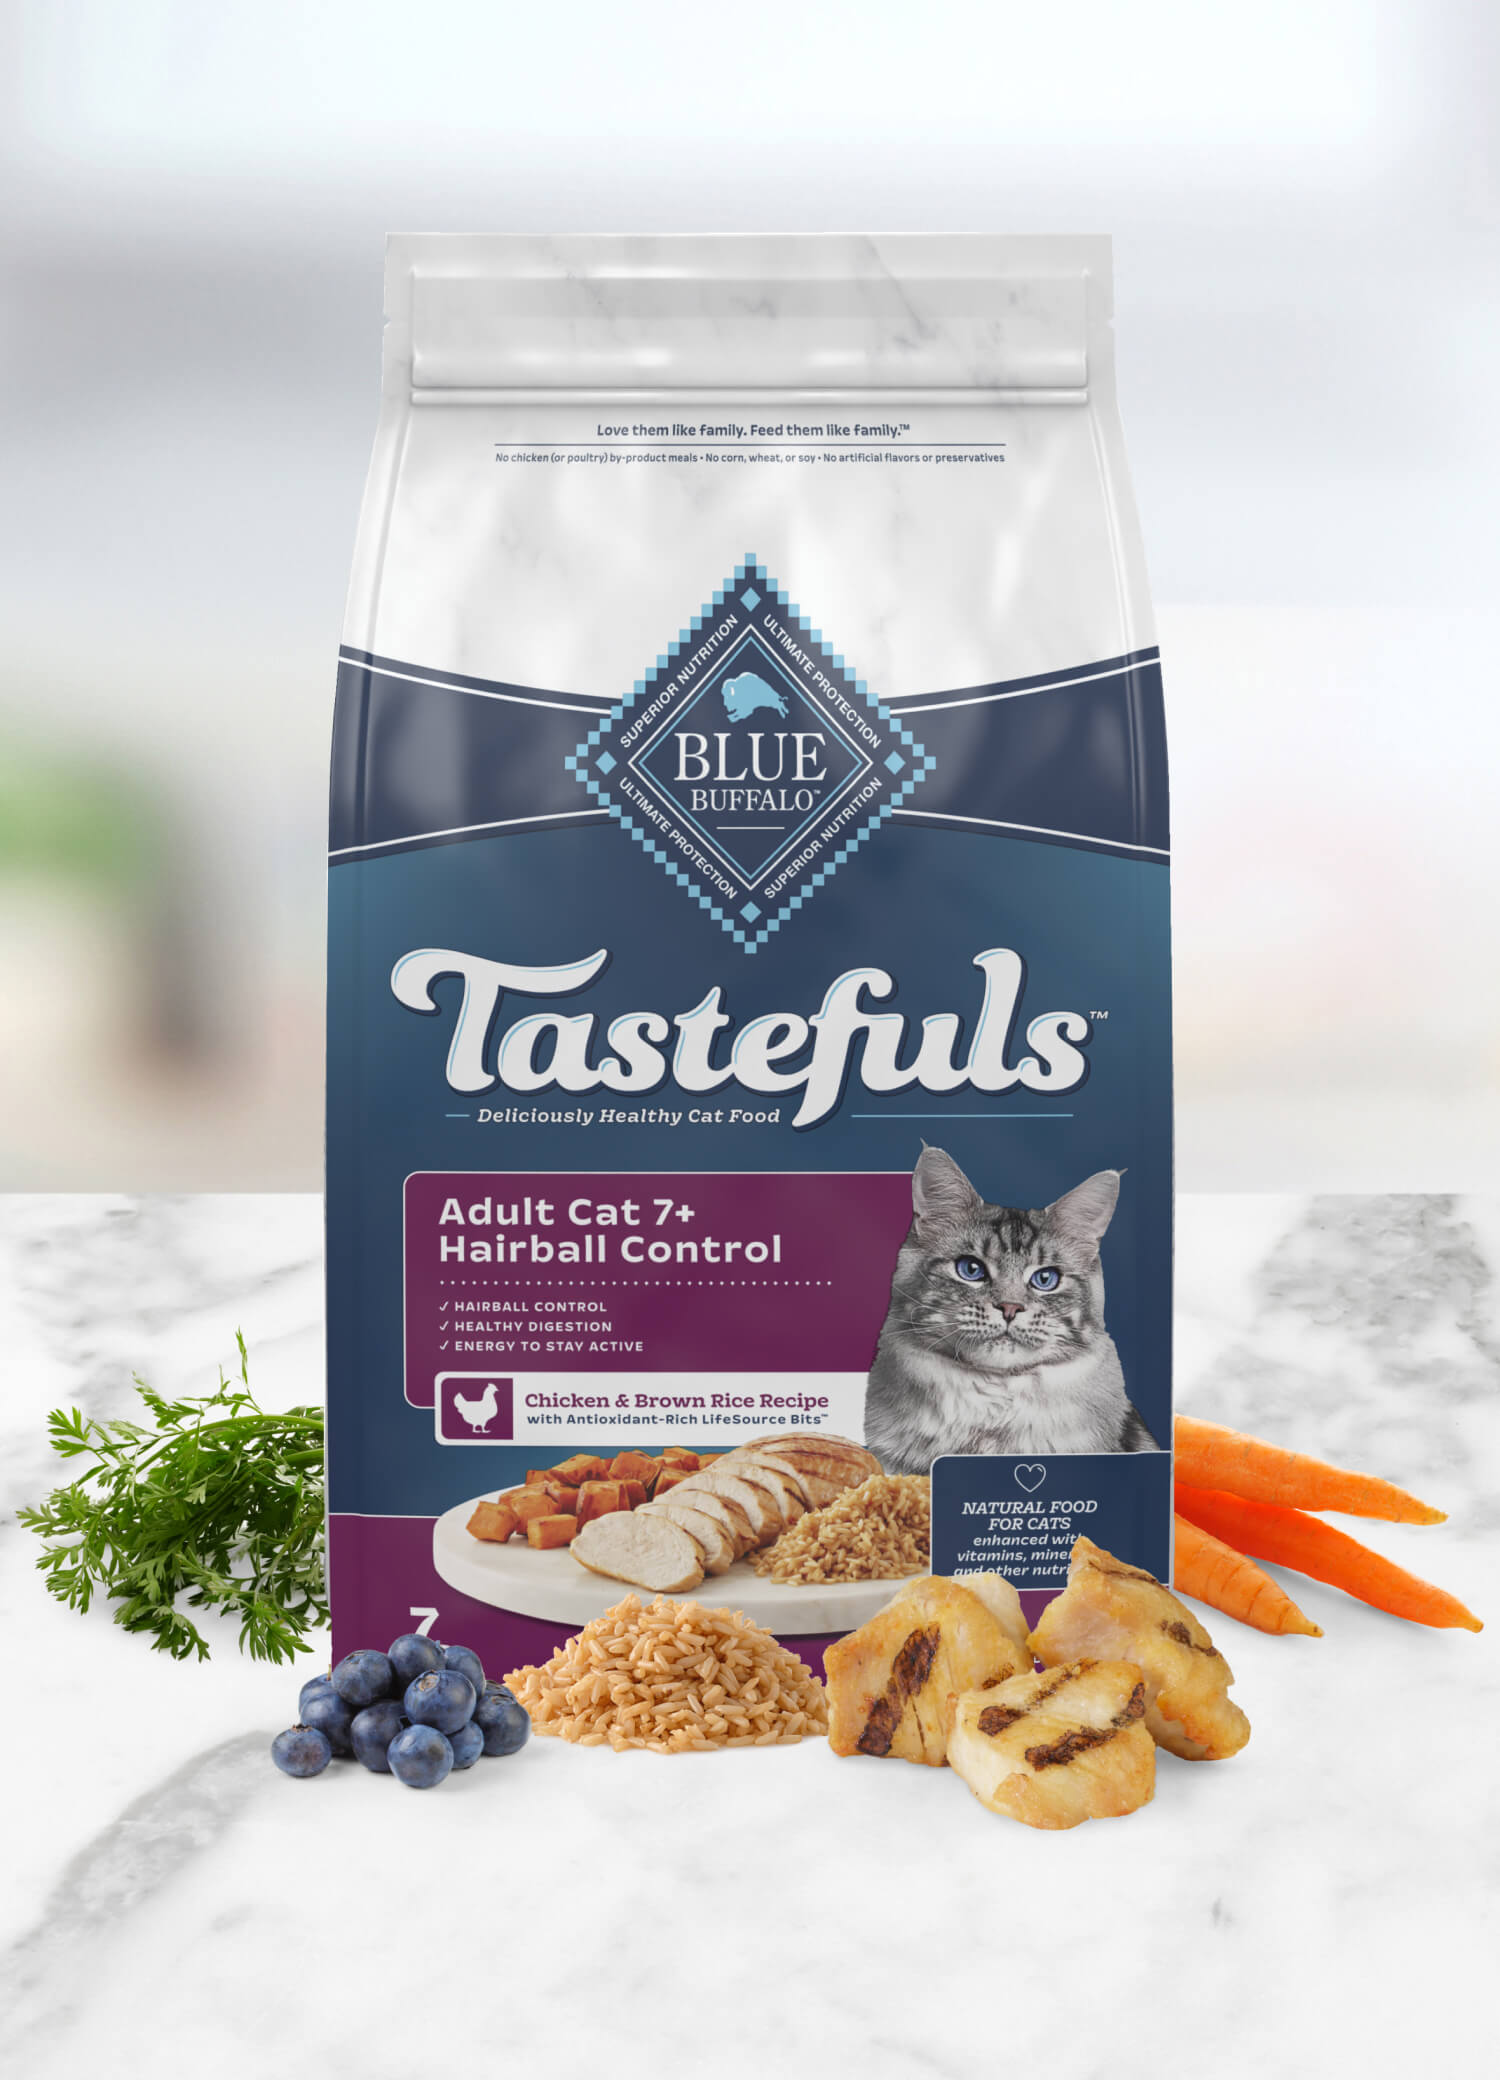 A bag of Blue Buffalo Tastefuls cat food for adult cat 7+, featuring chicken and brown rice recipe, shown with fresh ingredients.